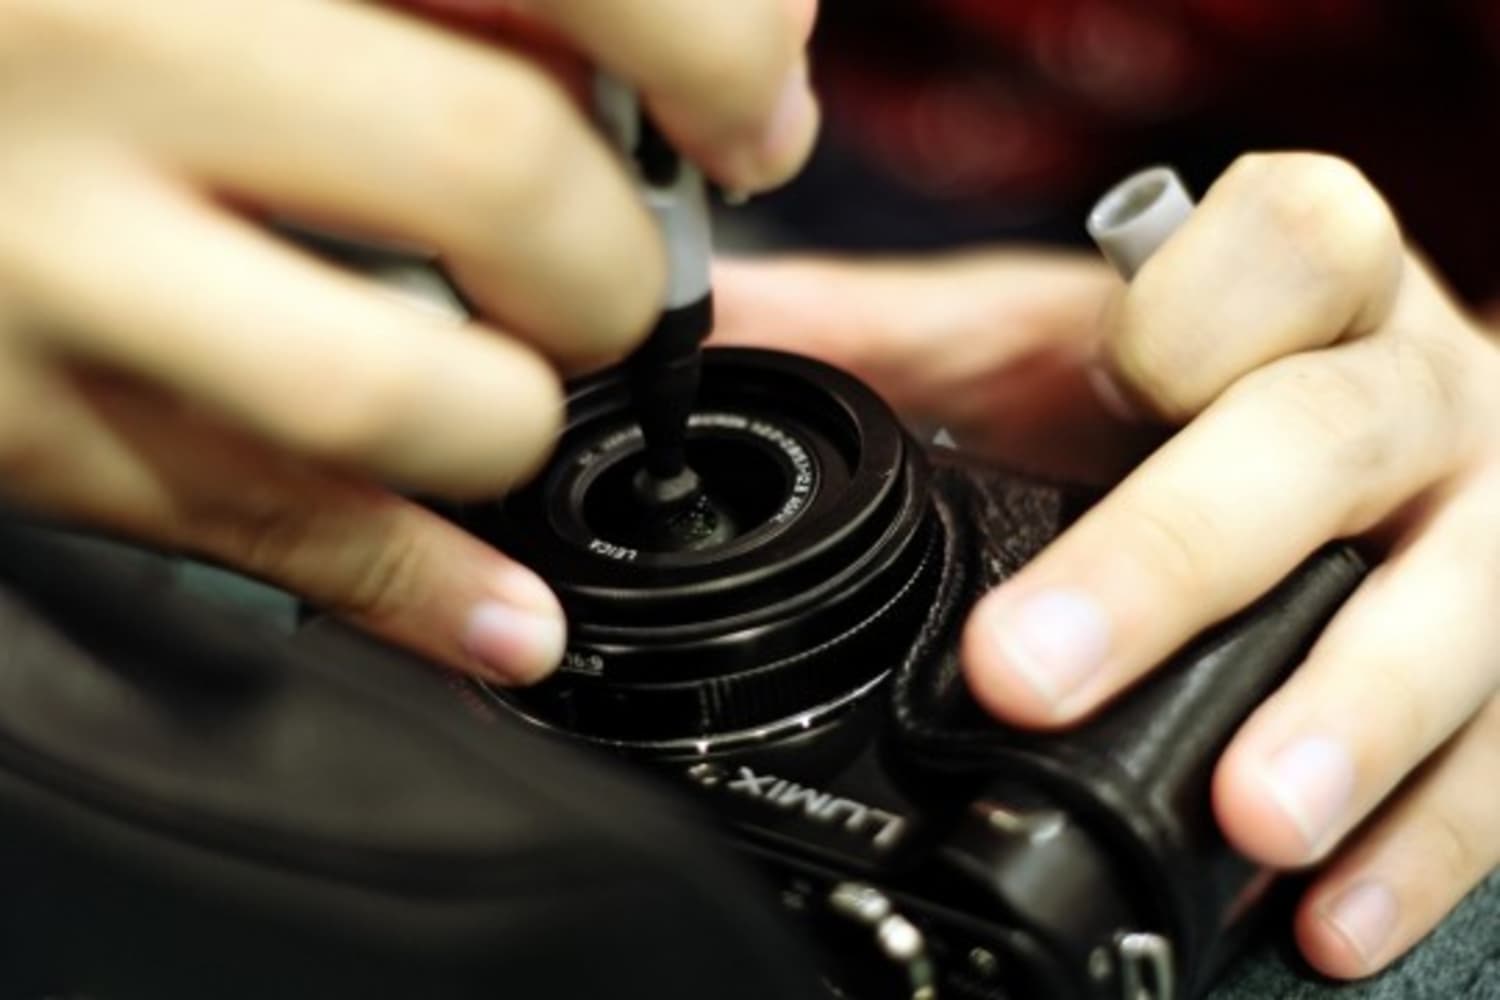 How to clean a DSLR Lens